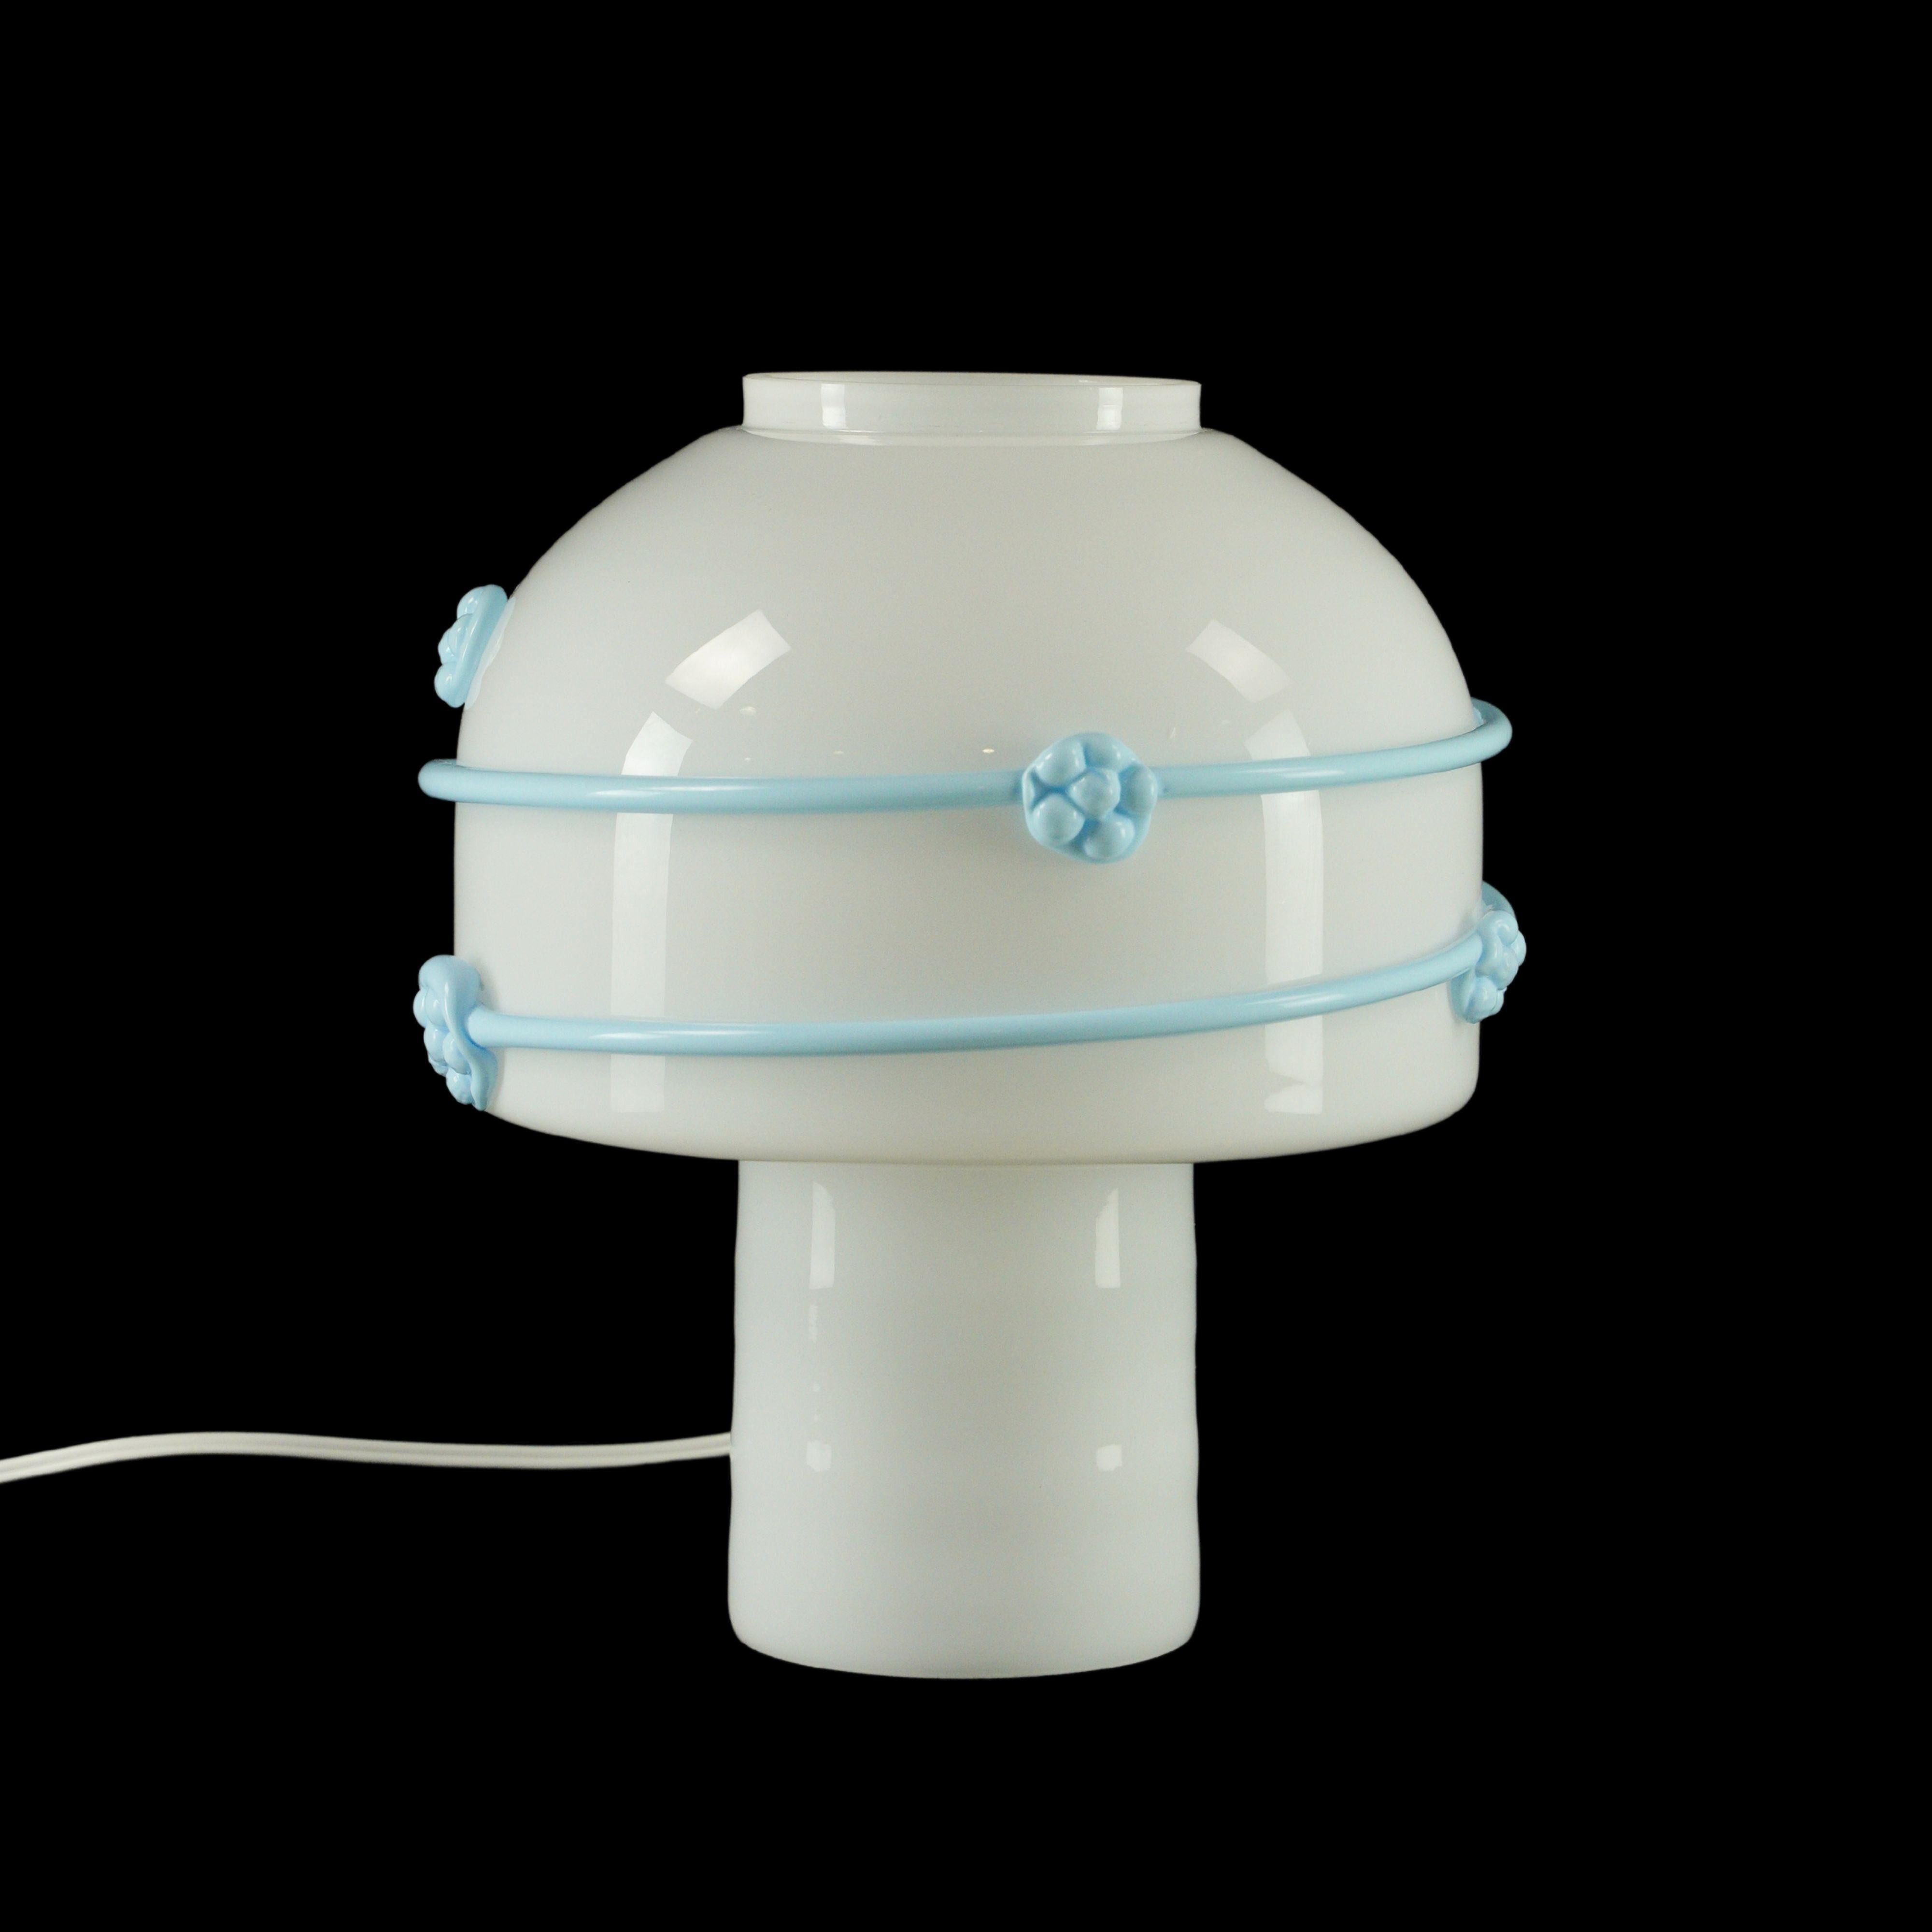 White Murano glass mushroom shaped table or desk lamp with blue floral line details. This requires one standard medium base bulb. This light is wired and ready to ship. Cleaned and restored. Good condition with appropriate wear from age. One